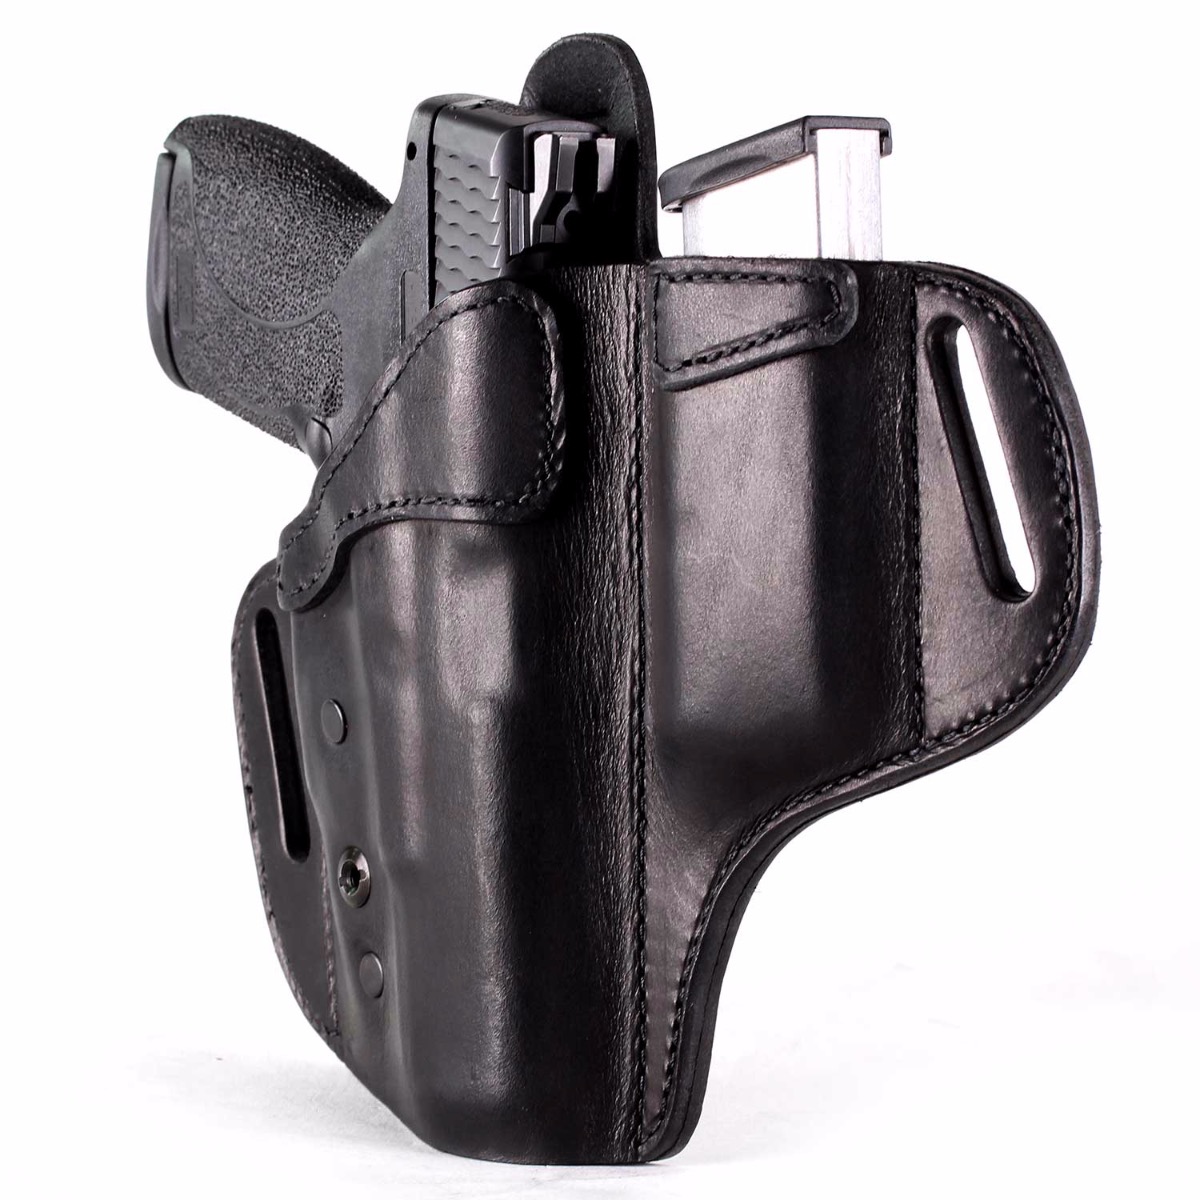 Springfield 1911 With 5" Barrel Tactical Gun holster With Extra Magazine Pouch 